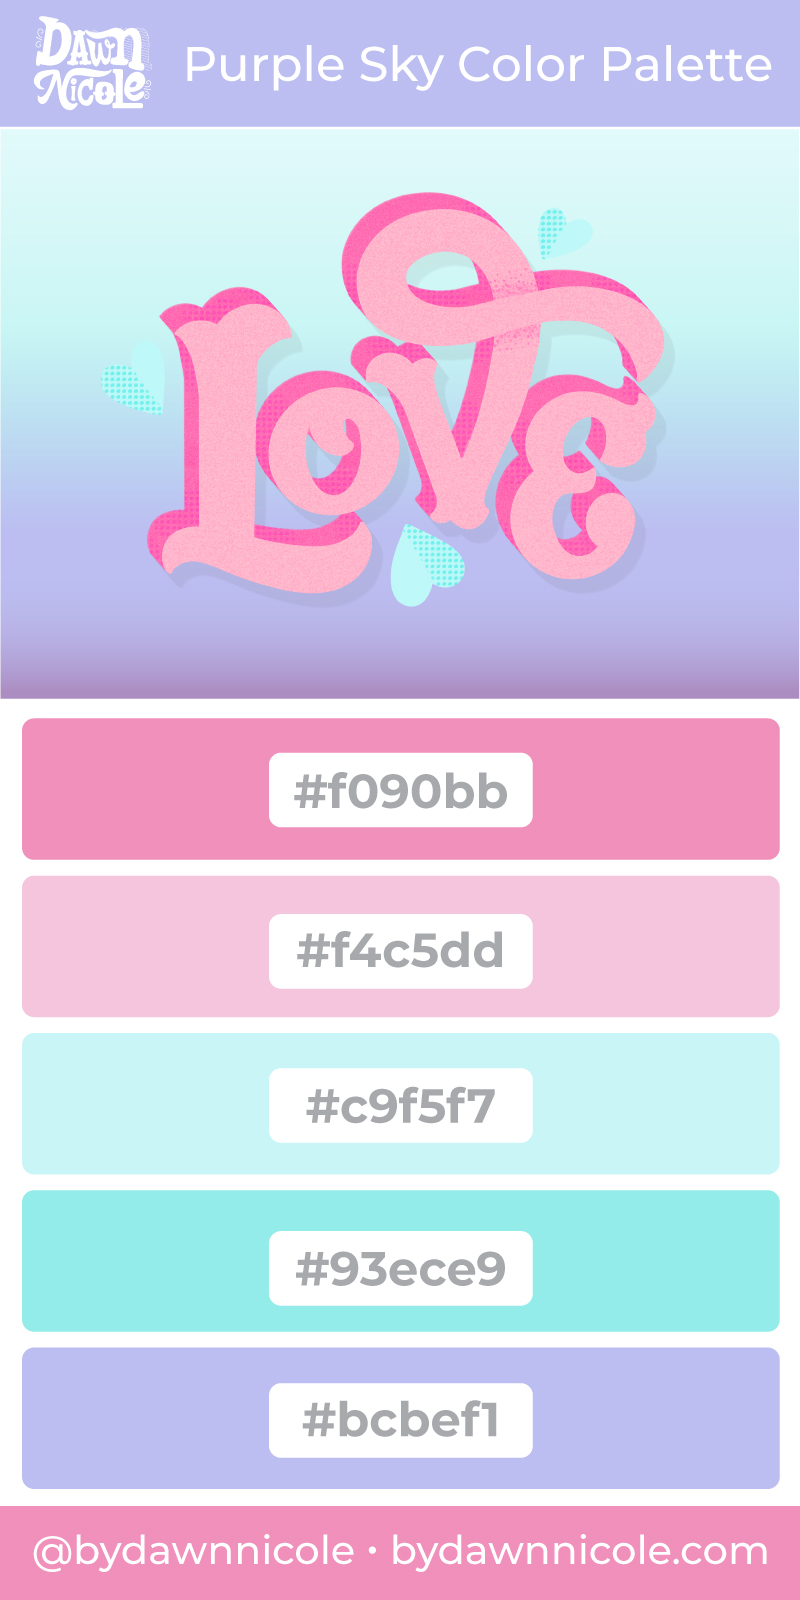 Purple Sky Color Palette. This free color palette is featured in my Quinn Serif Style Textured "Love" Lettering. 